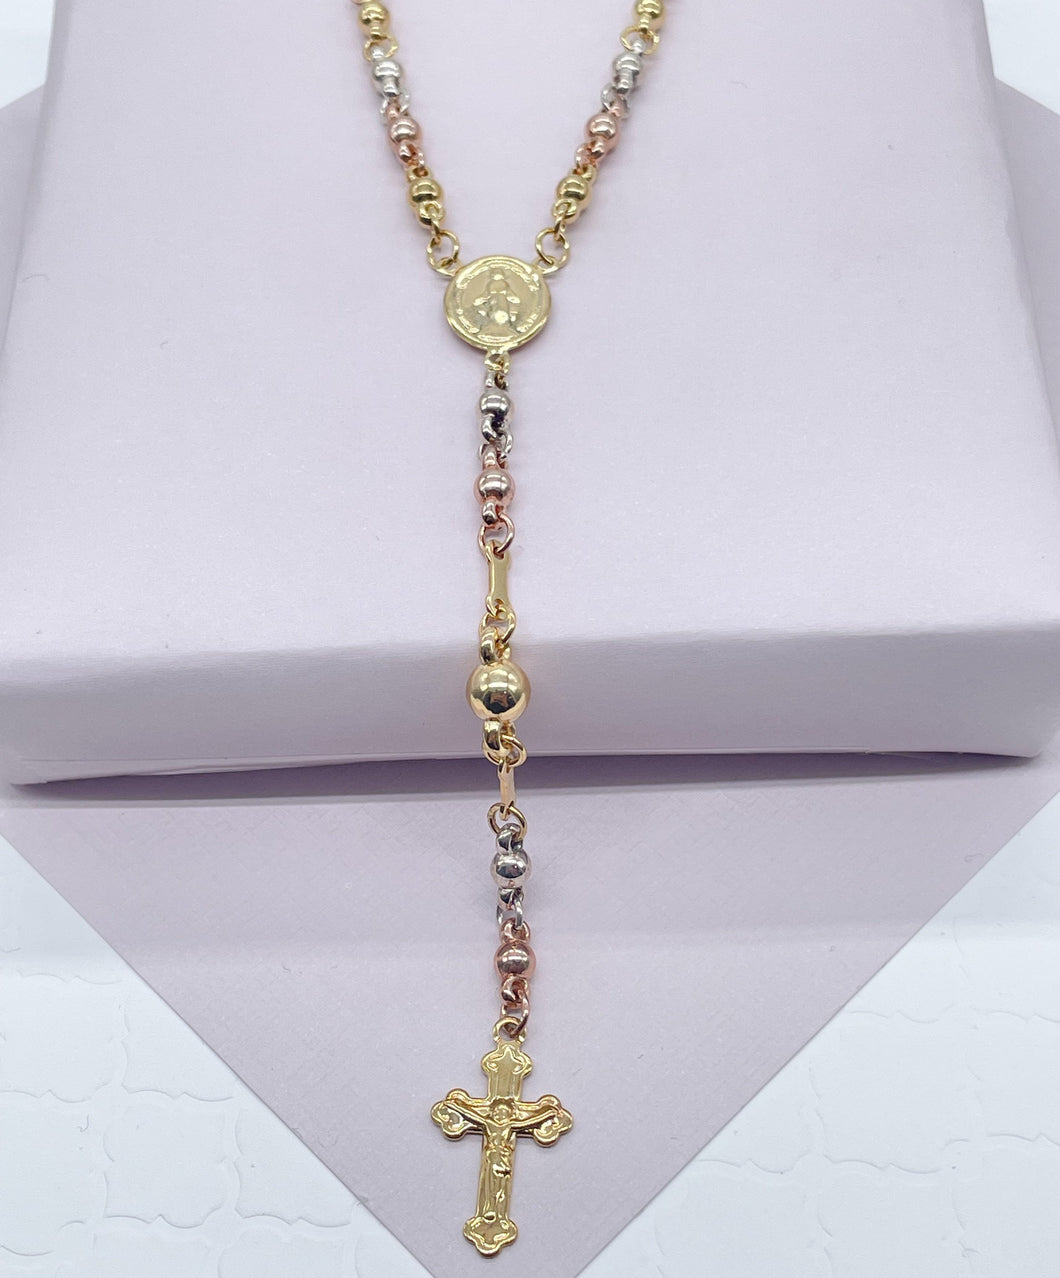 Trendy 18k Gold Filled Tri Color Bead Rosary Necklace Featuring Our Lady of